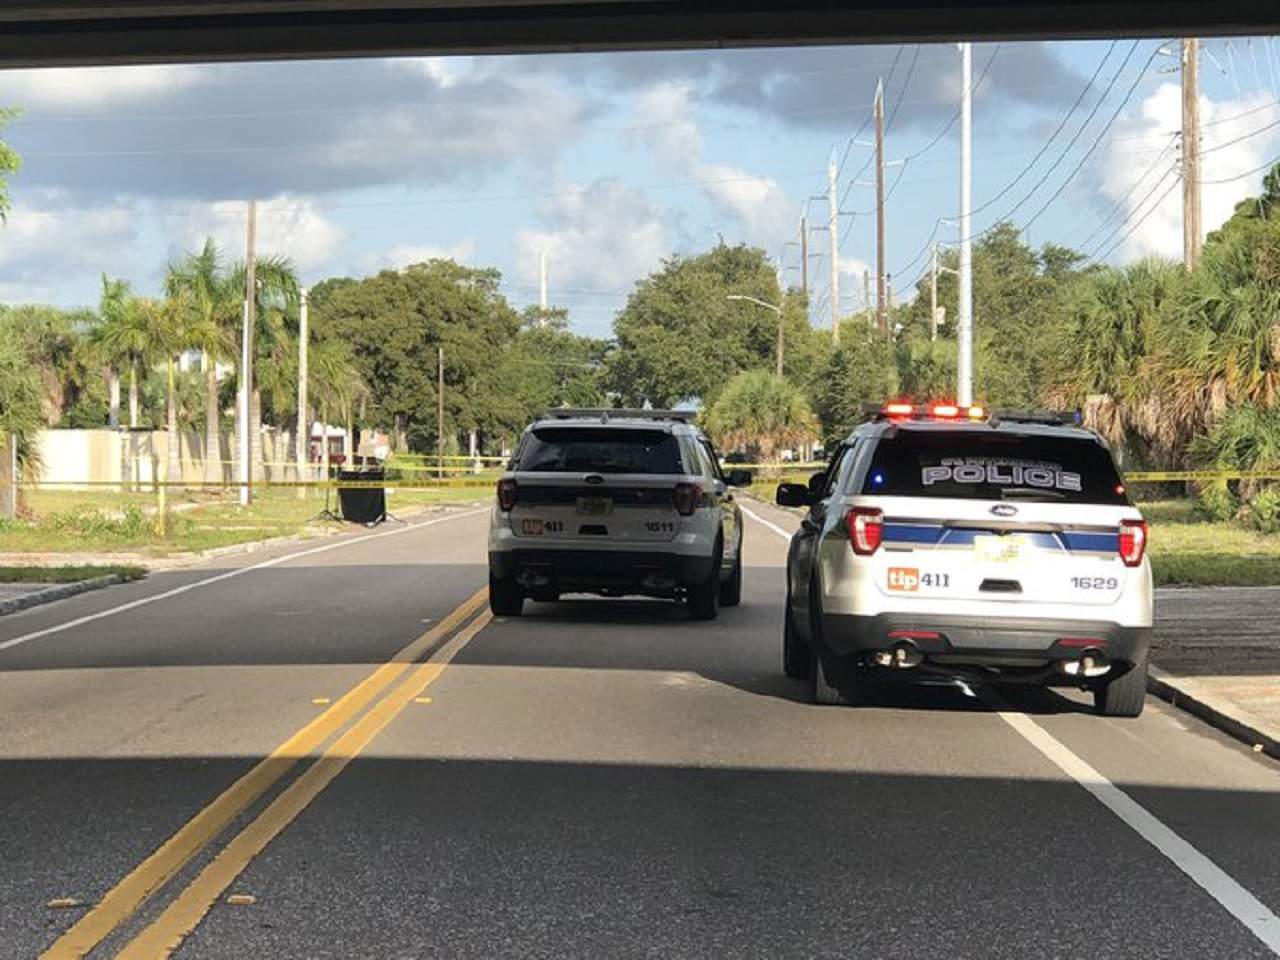 Jogger finds human head on side of Florida road